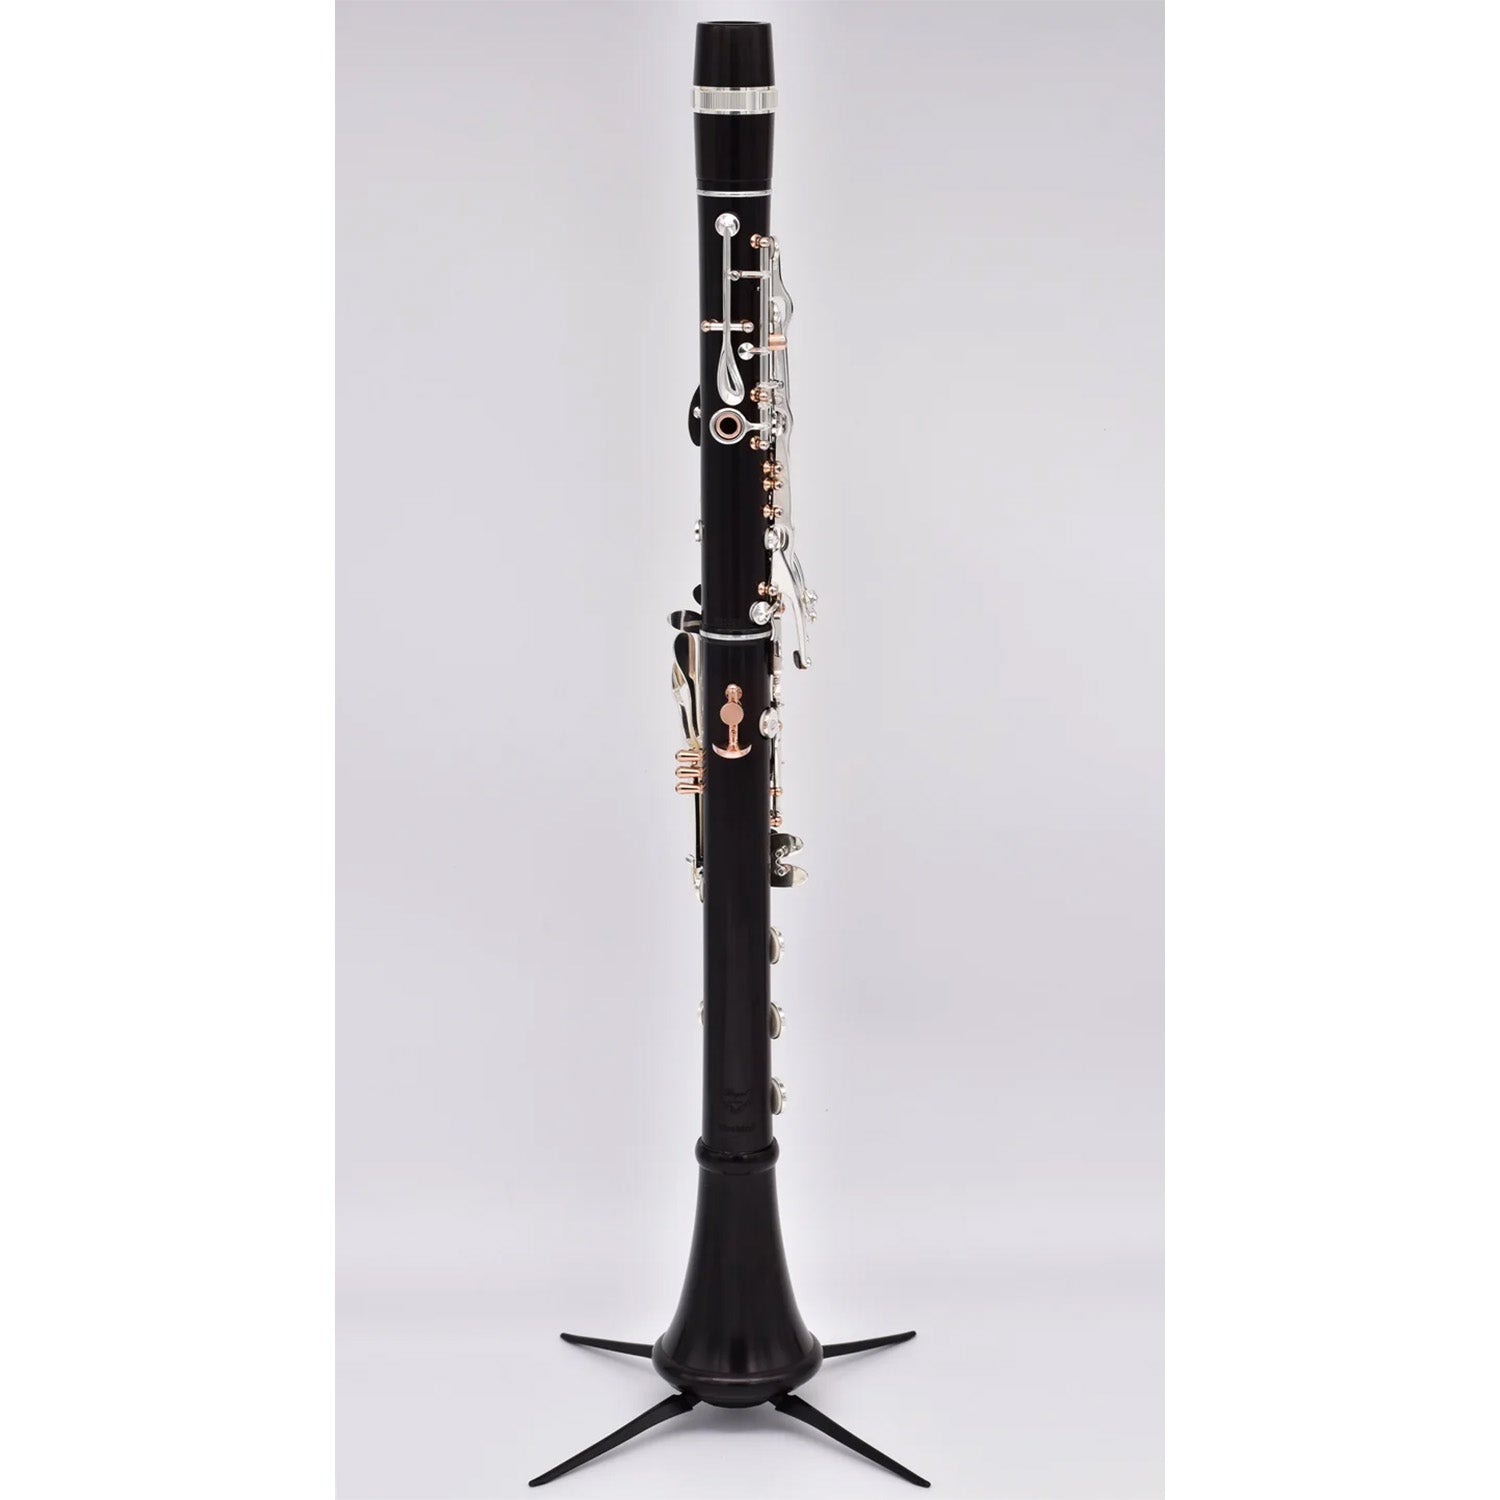 full rear shot of Firebird clarinet assembled on a stand, against white background